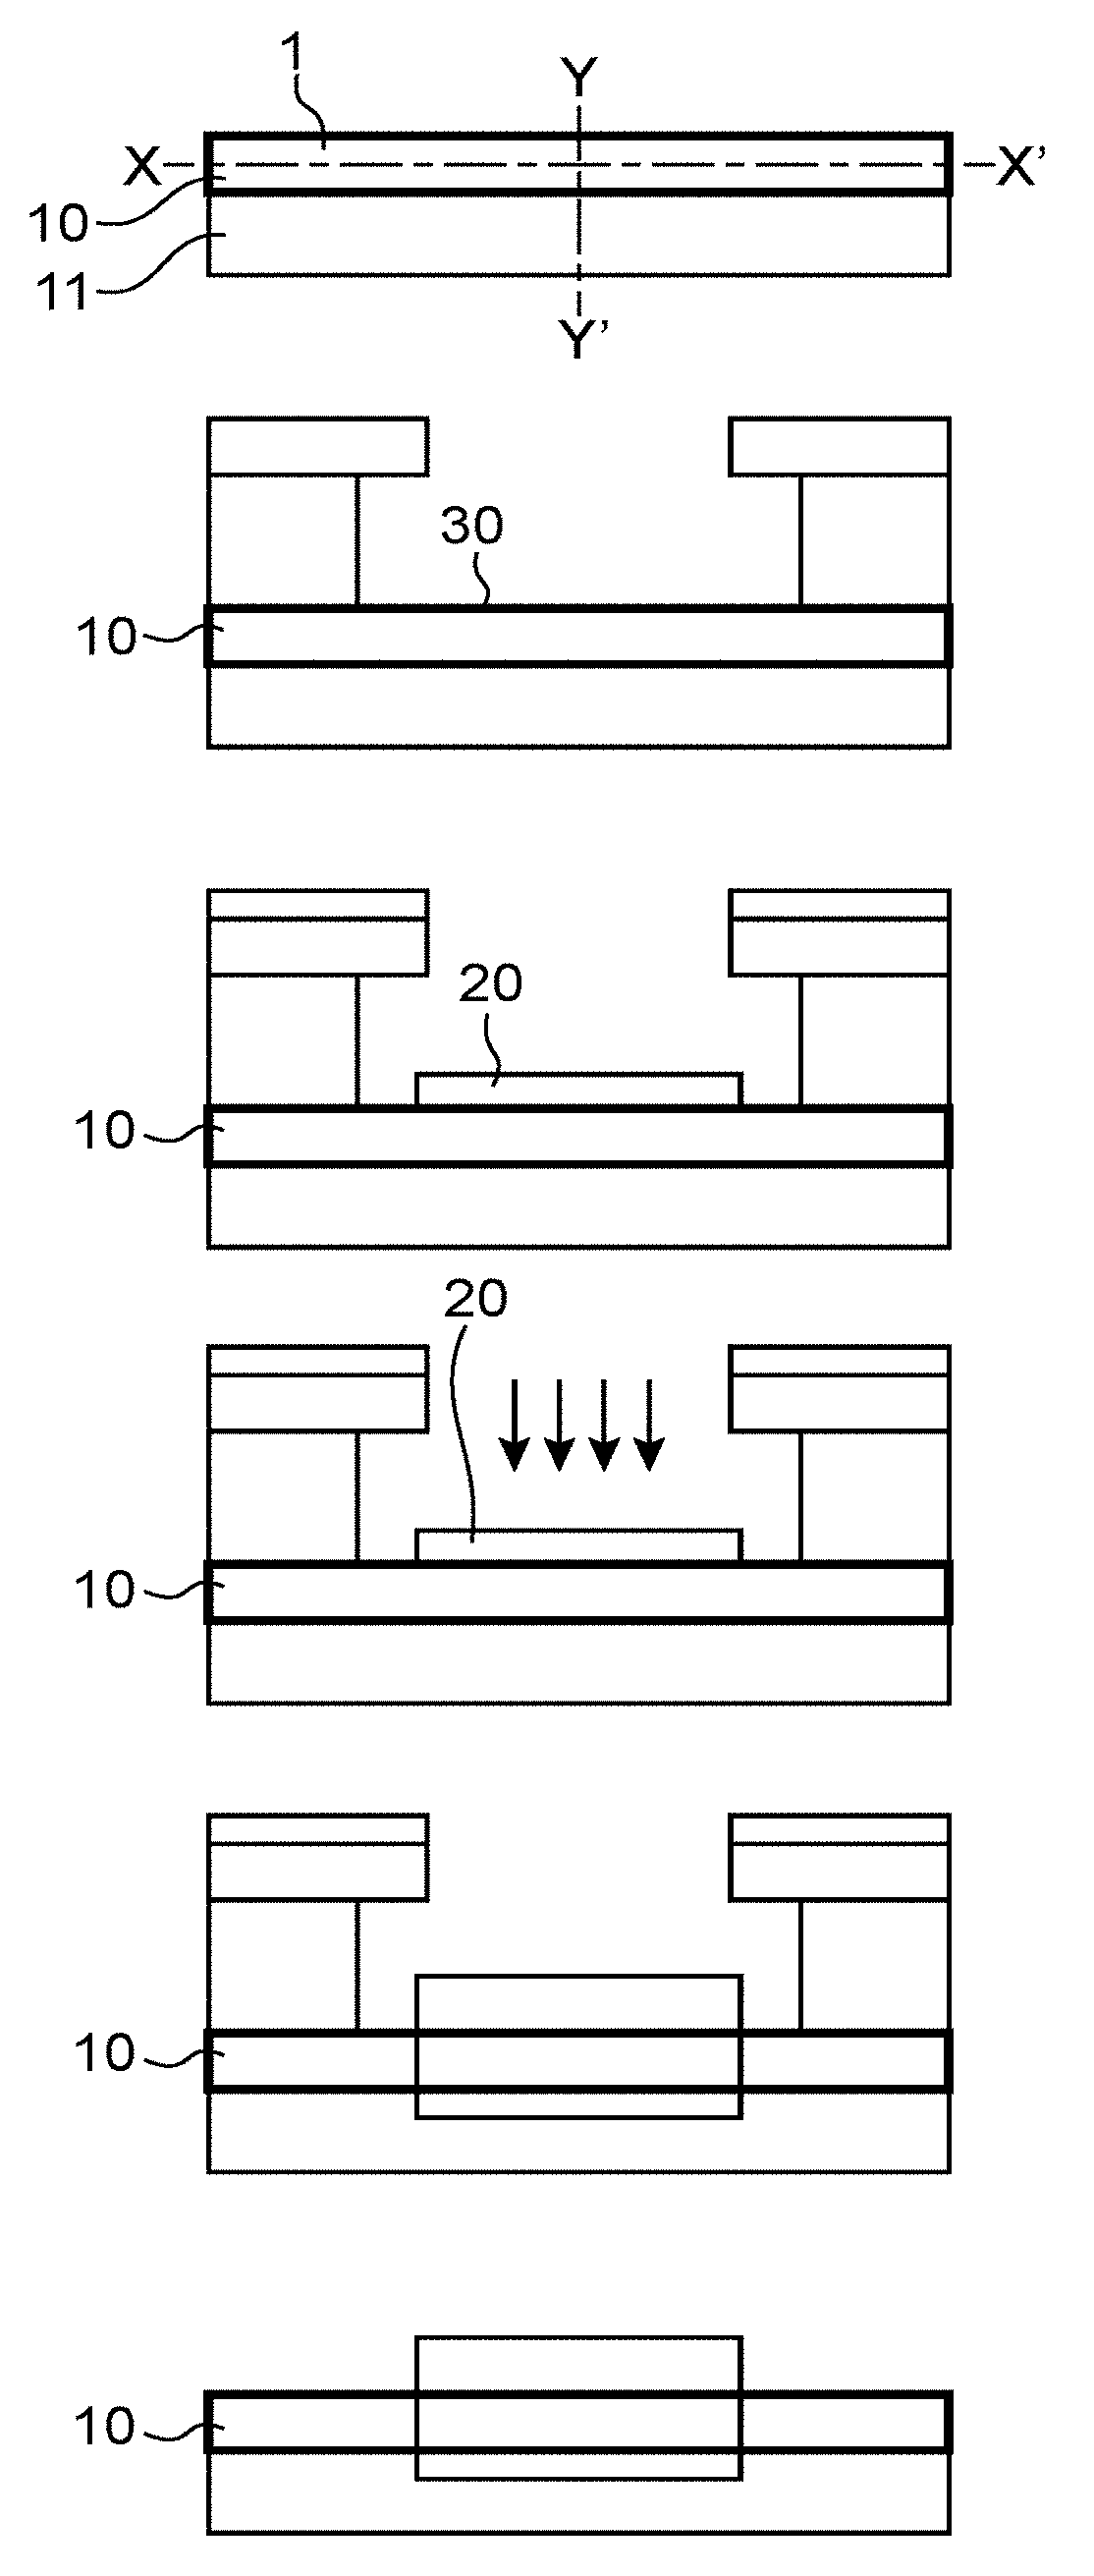 Method for manufacturing an electrical contact on a structure